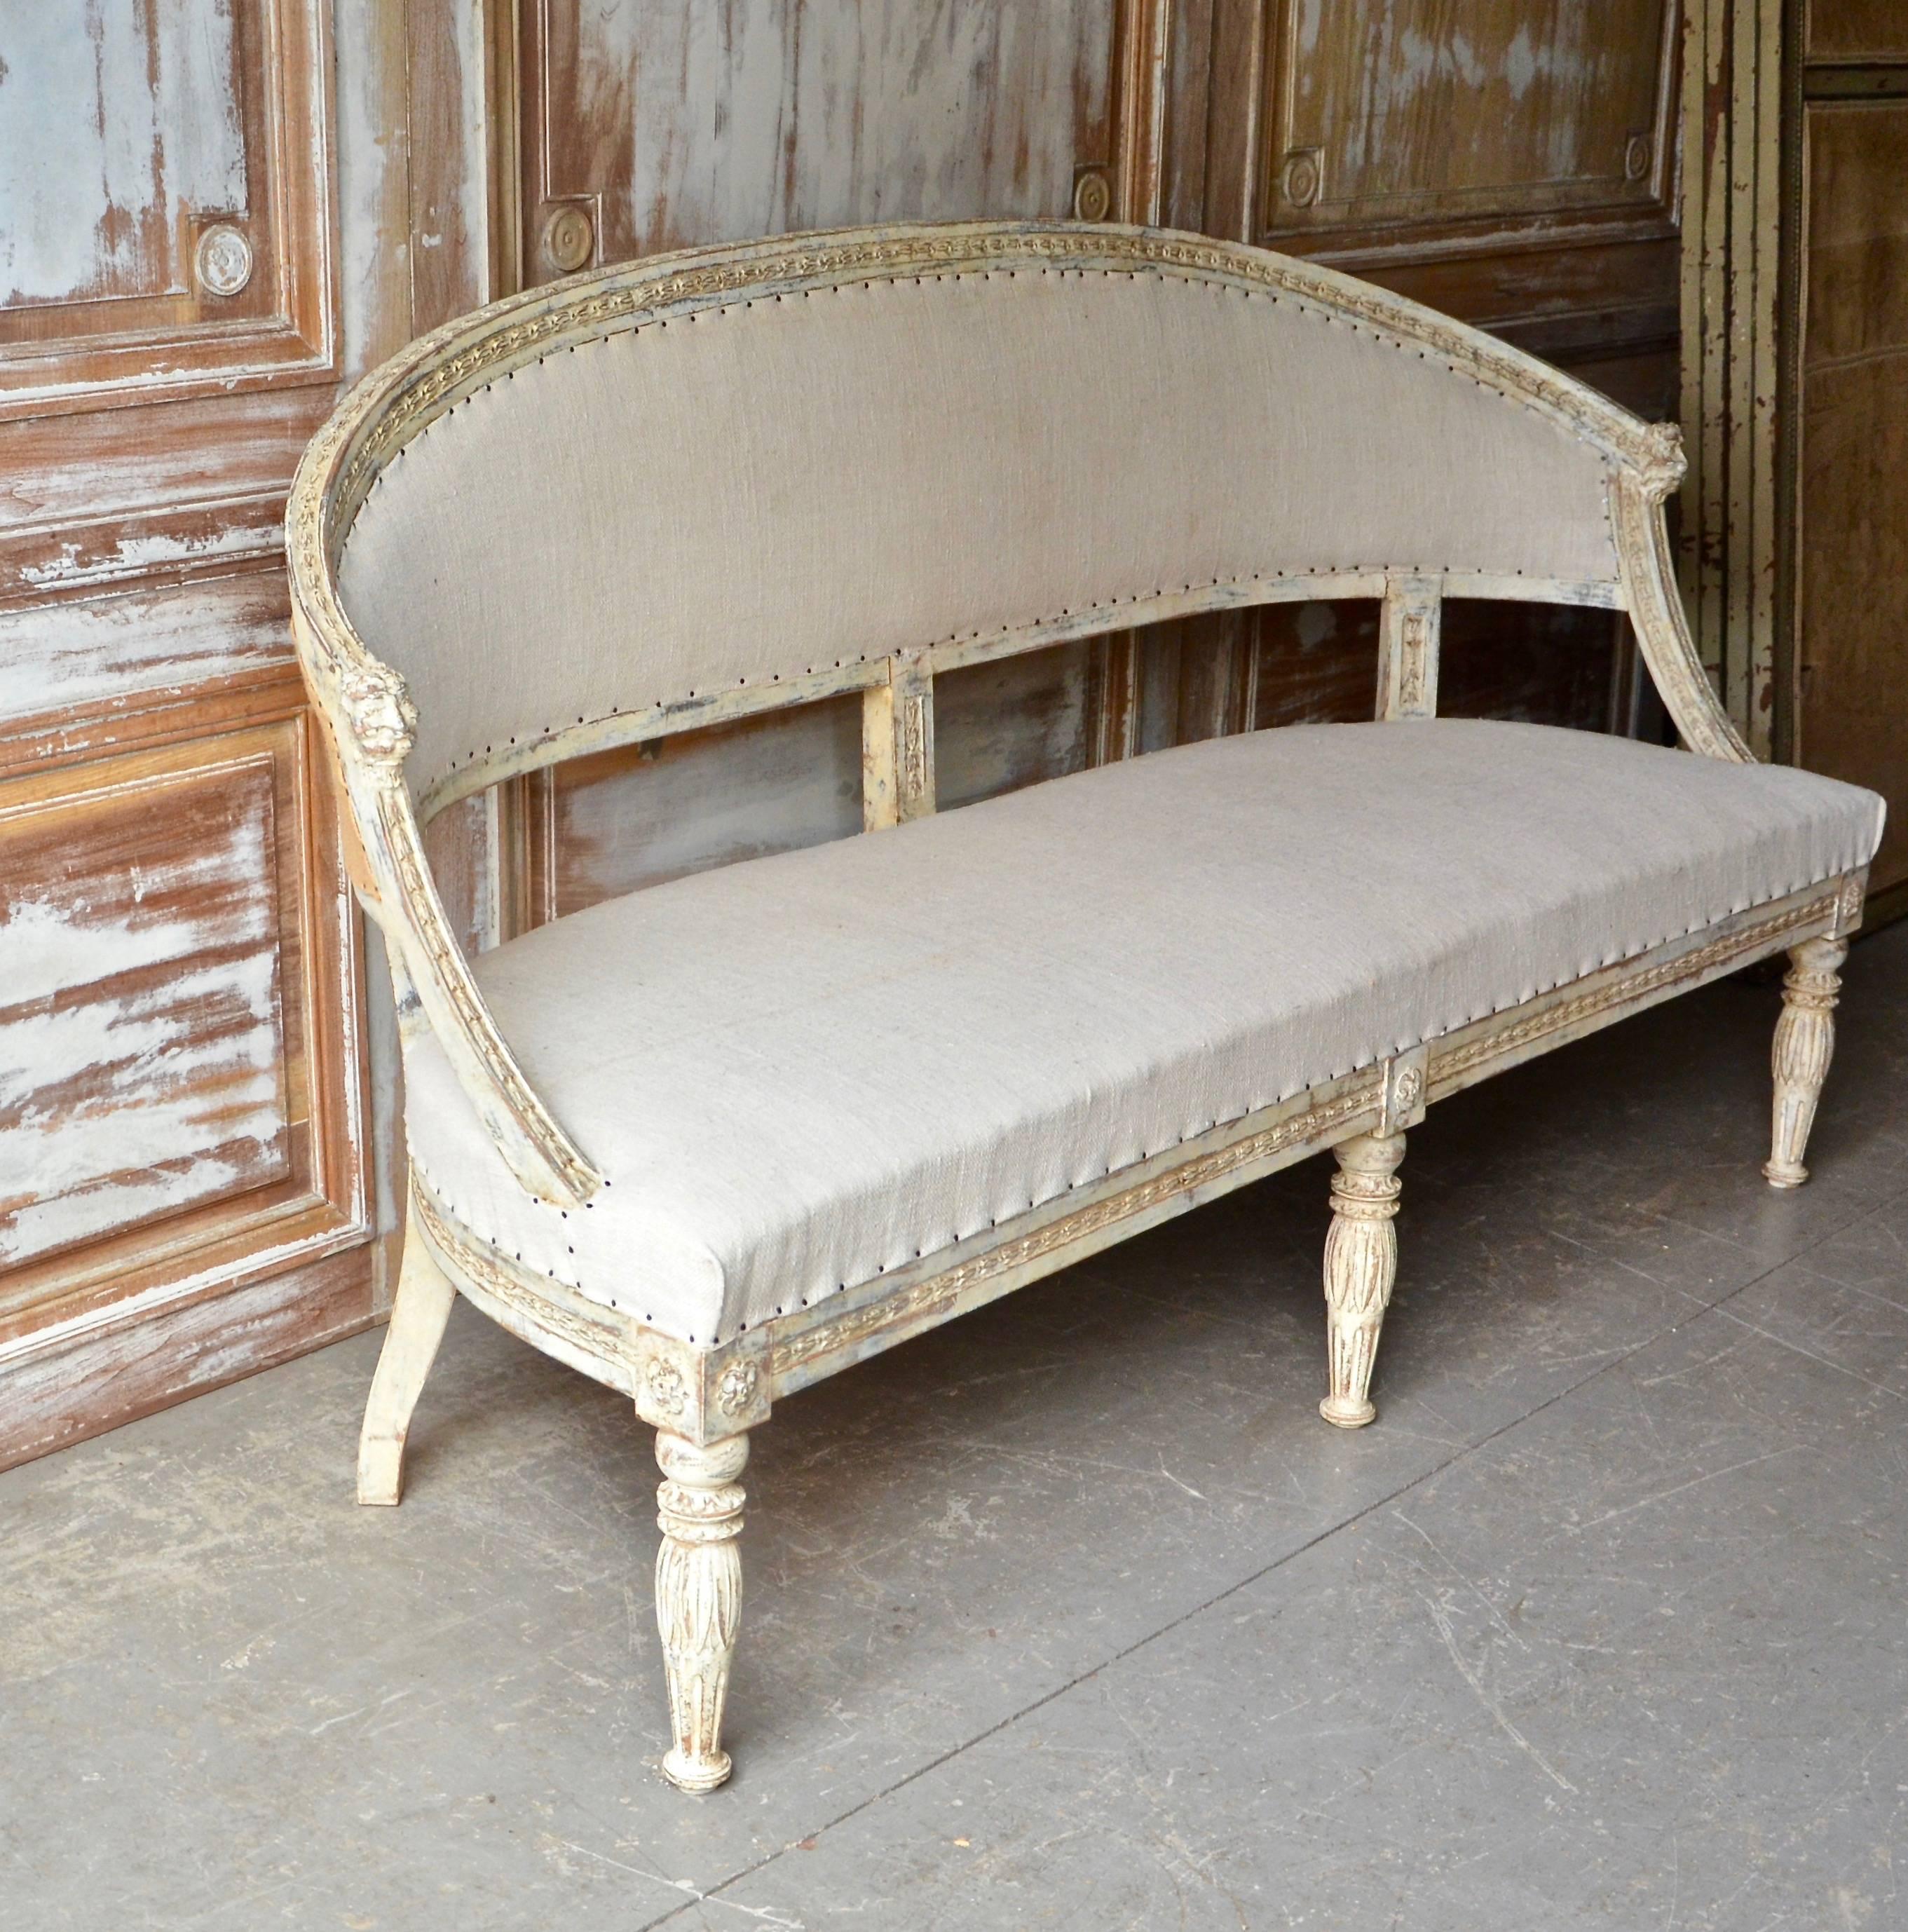 Swedish, 19th century barrel back sofa settee with beautifully carved frame with bell flower and lion's heads carvings. Richly carved front legs with lotus flowers and rosettes. Scraped to original paint and upholstered in antique linen and